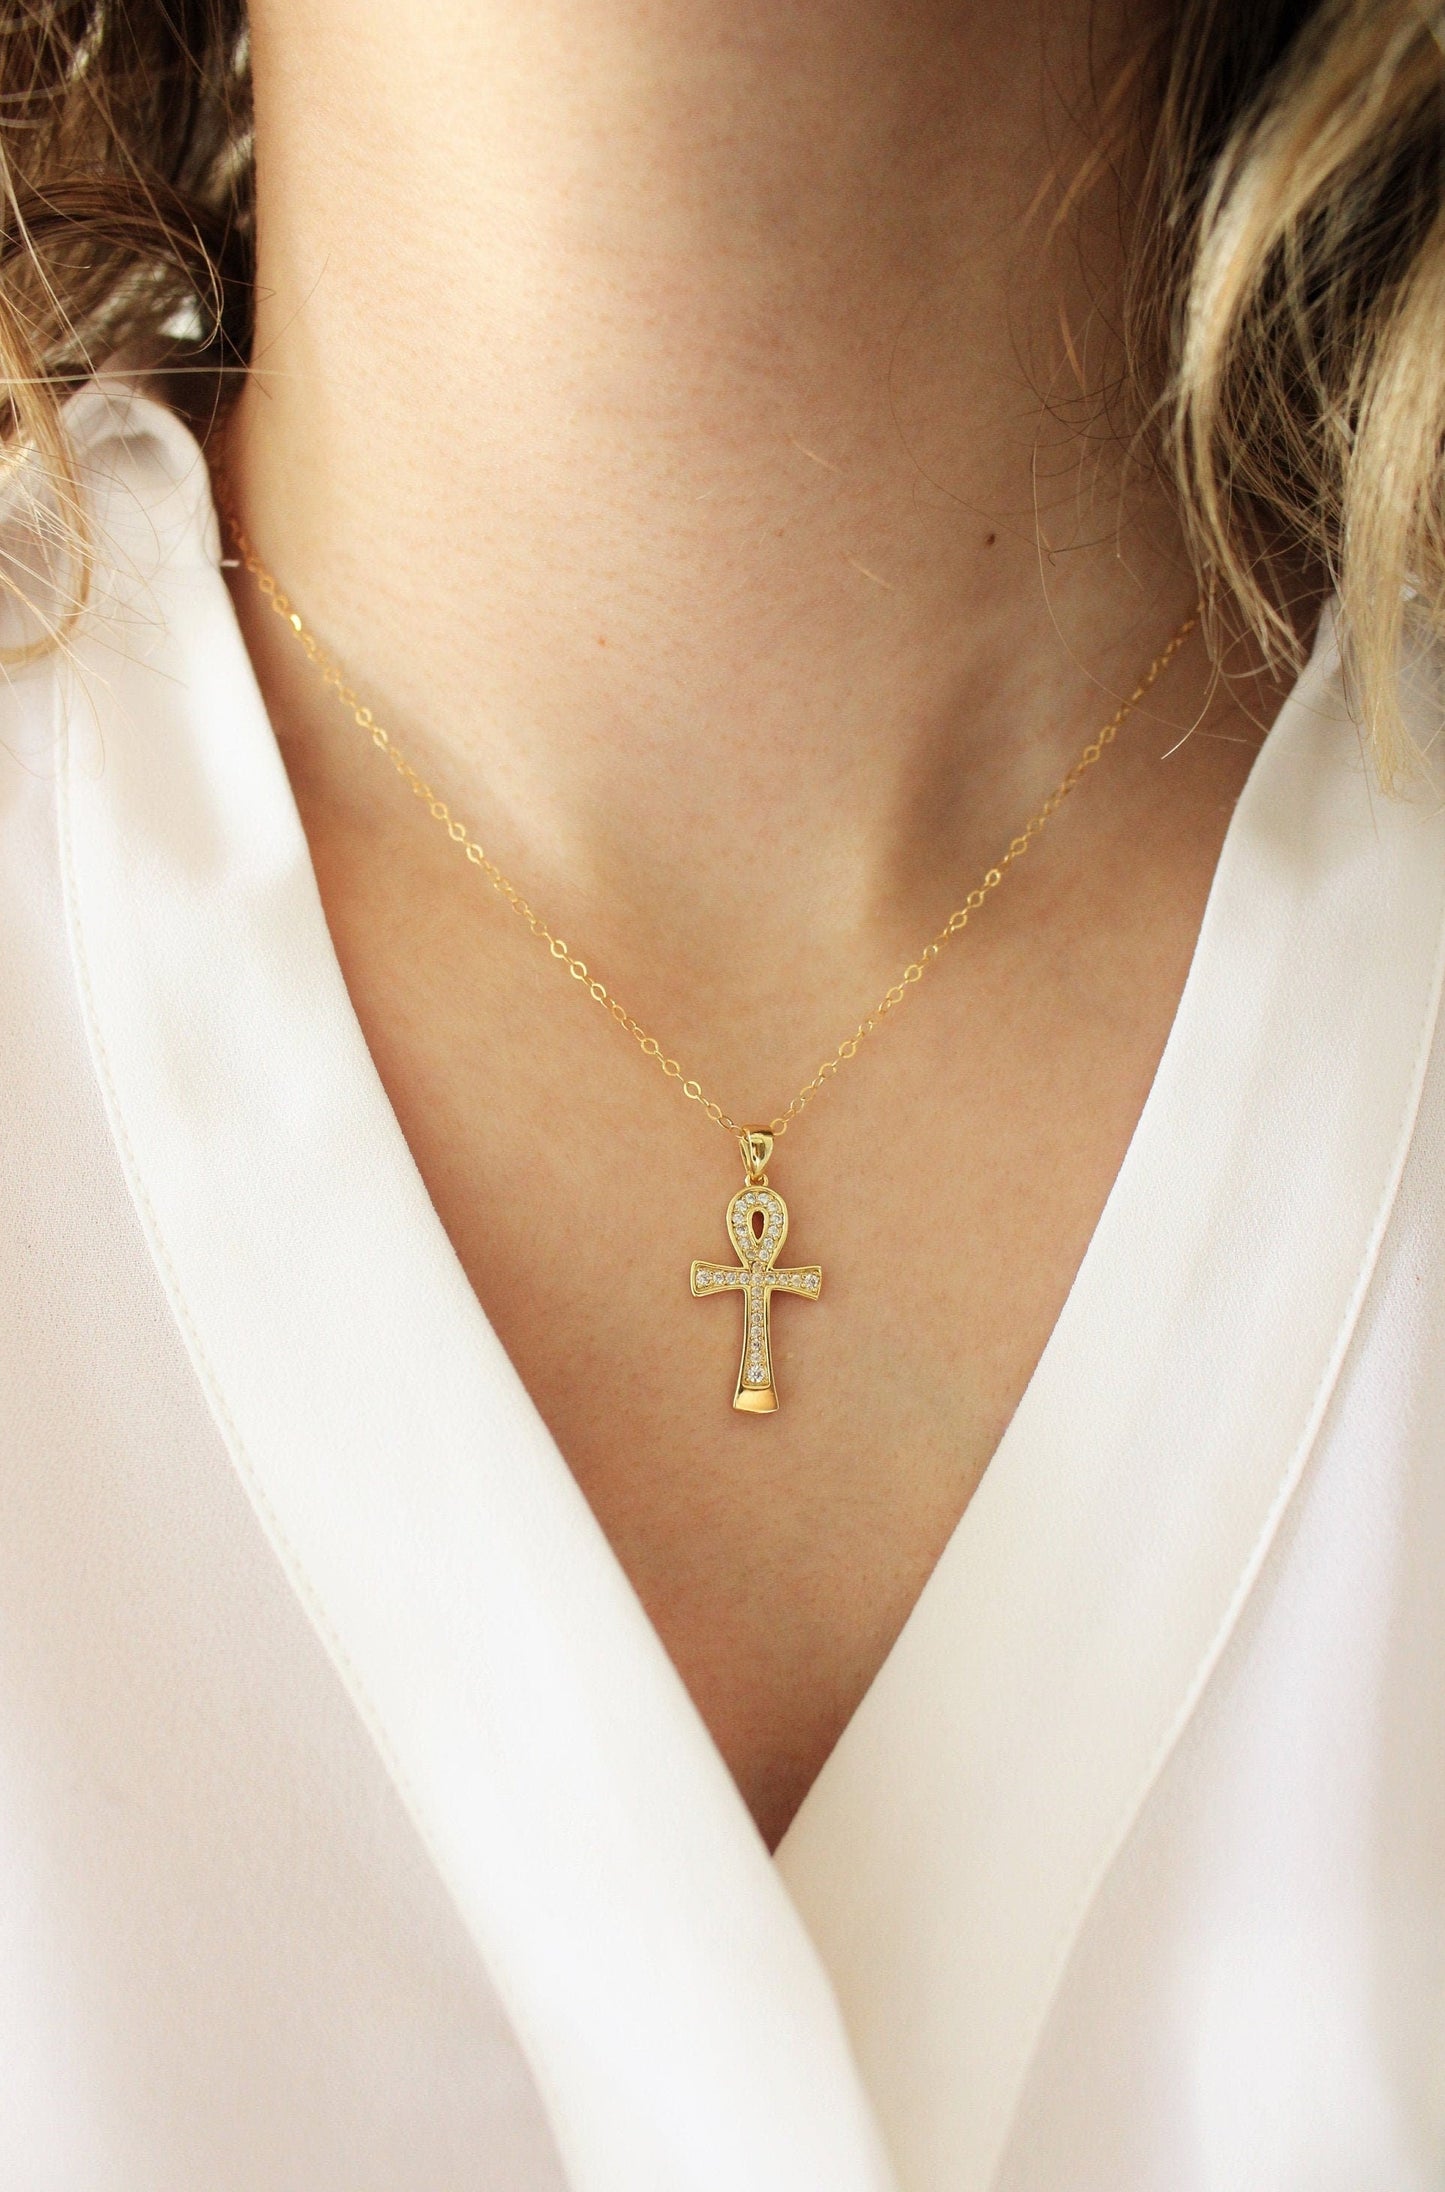 Ankh necklace ∙ Gold filled chain ∙ Paved charm cross zircon ∙ Ansated cross pantheon egypt ∙ 14x29mm